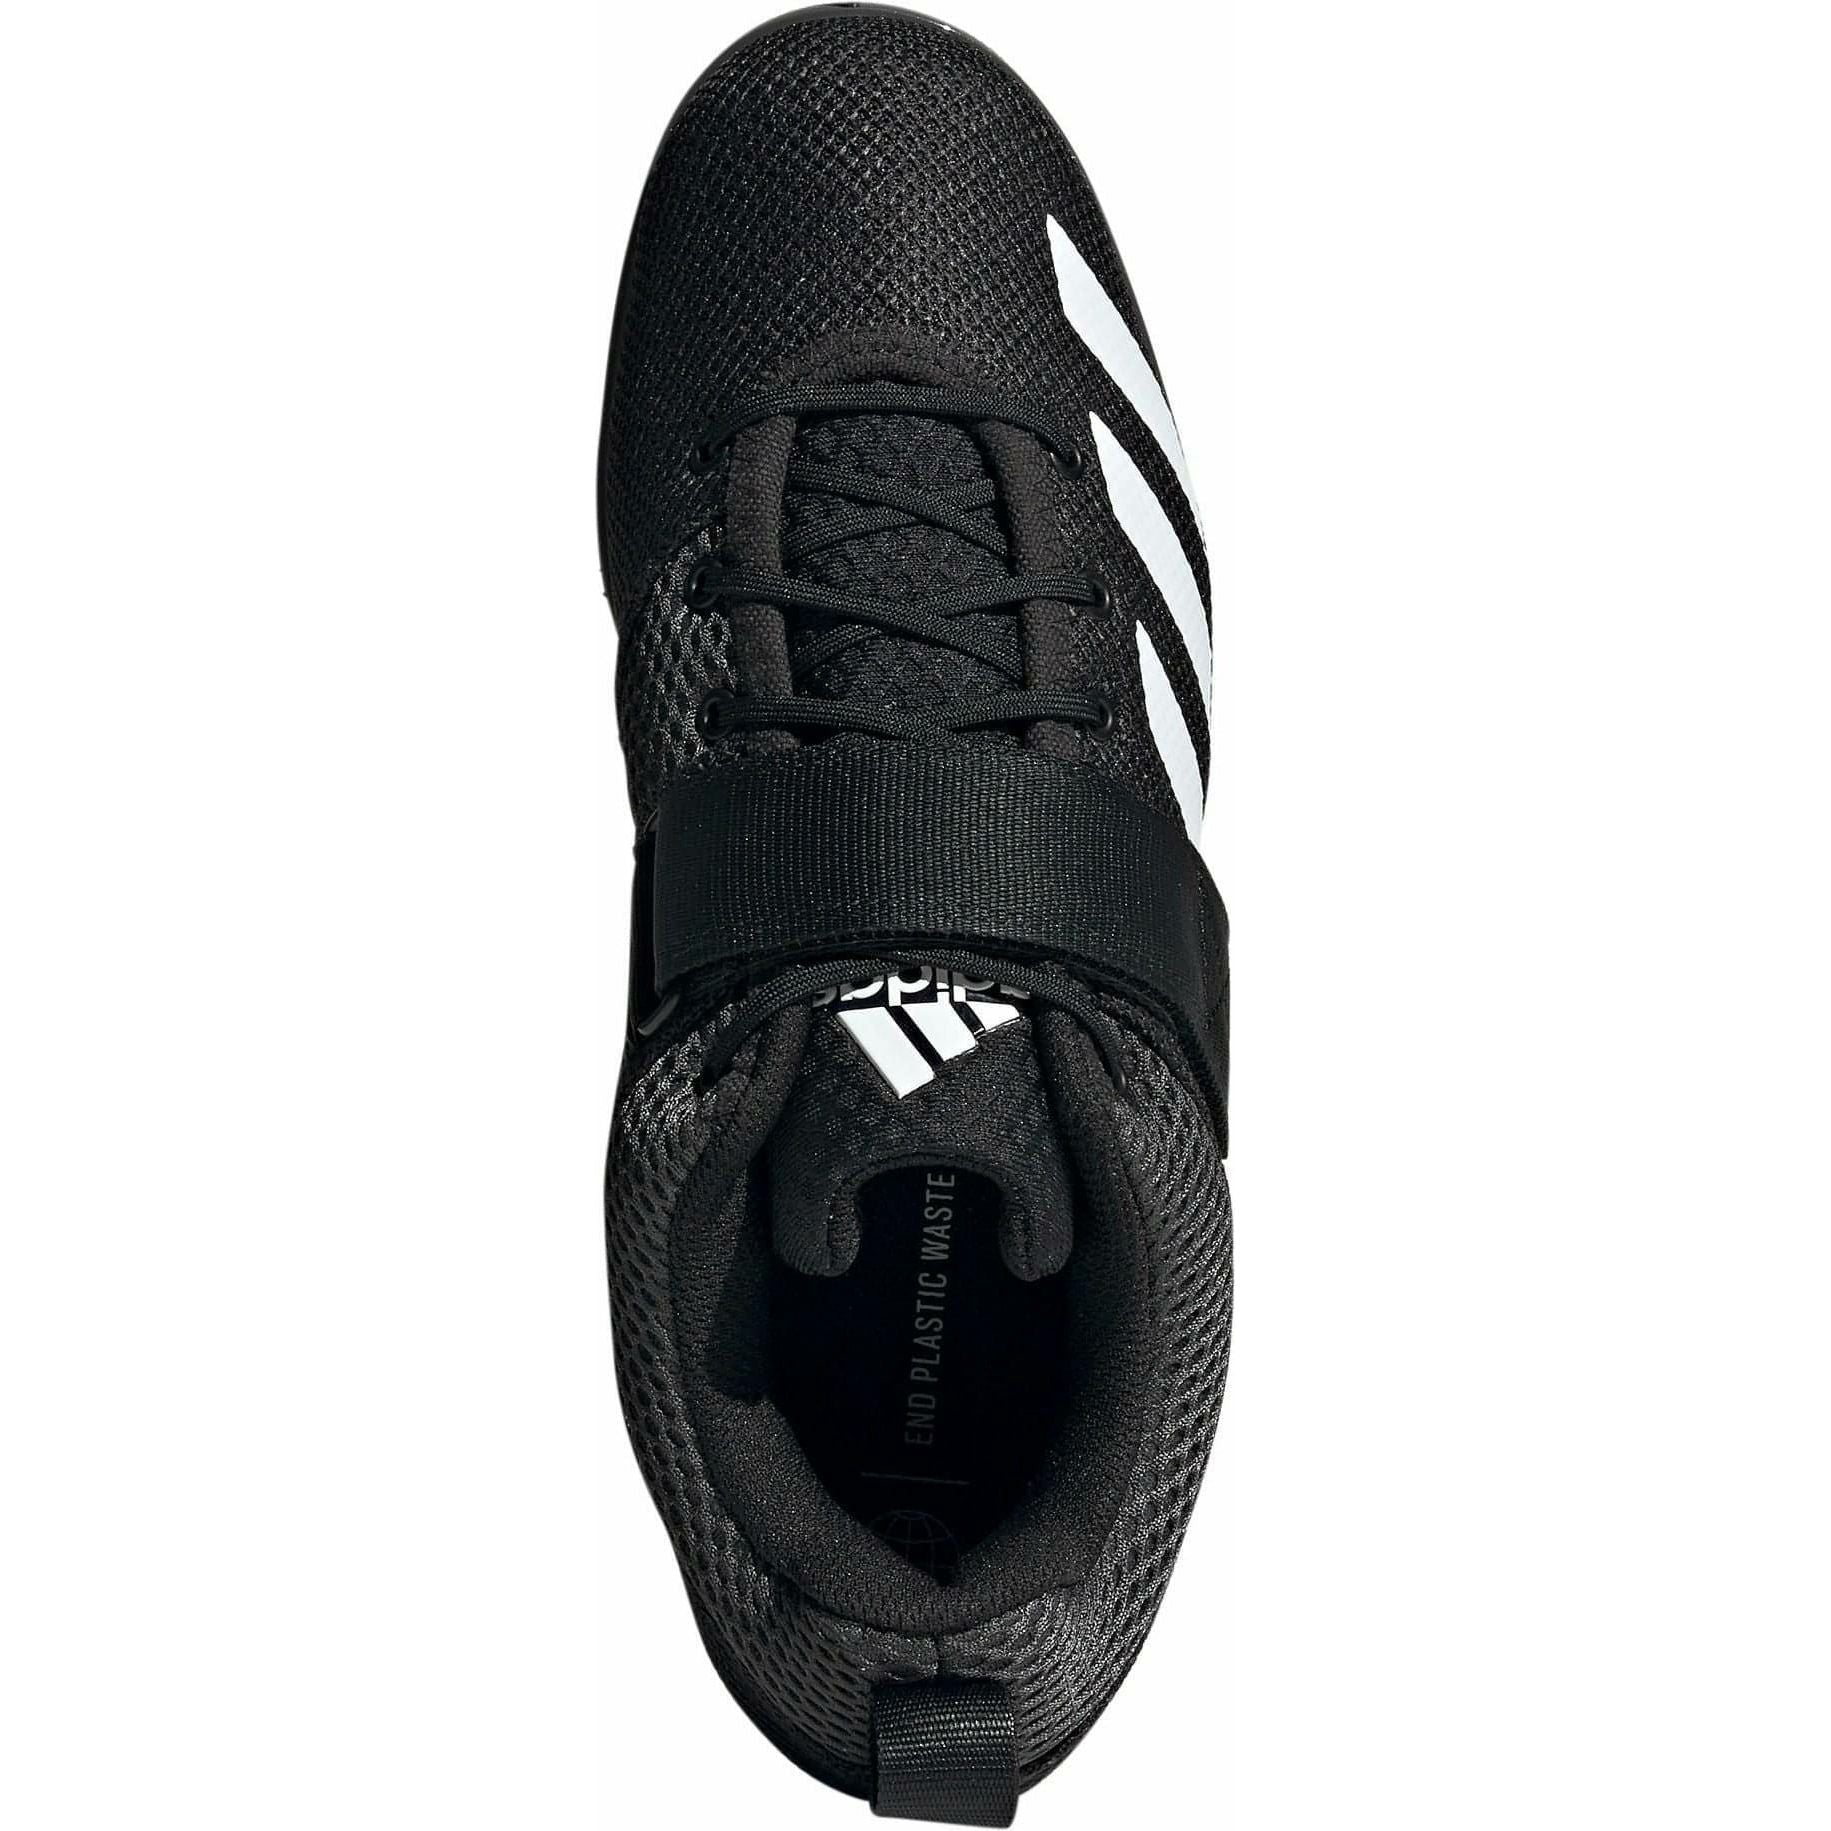 Adidas Powerlift Gy8918 Top